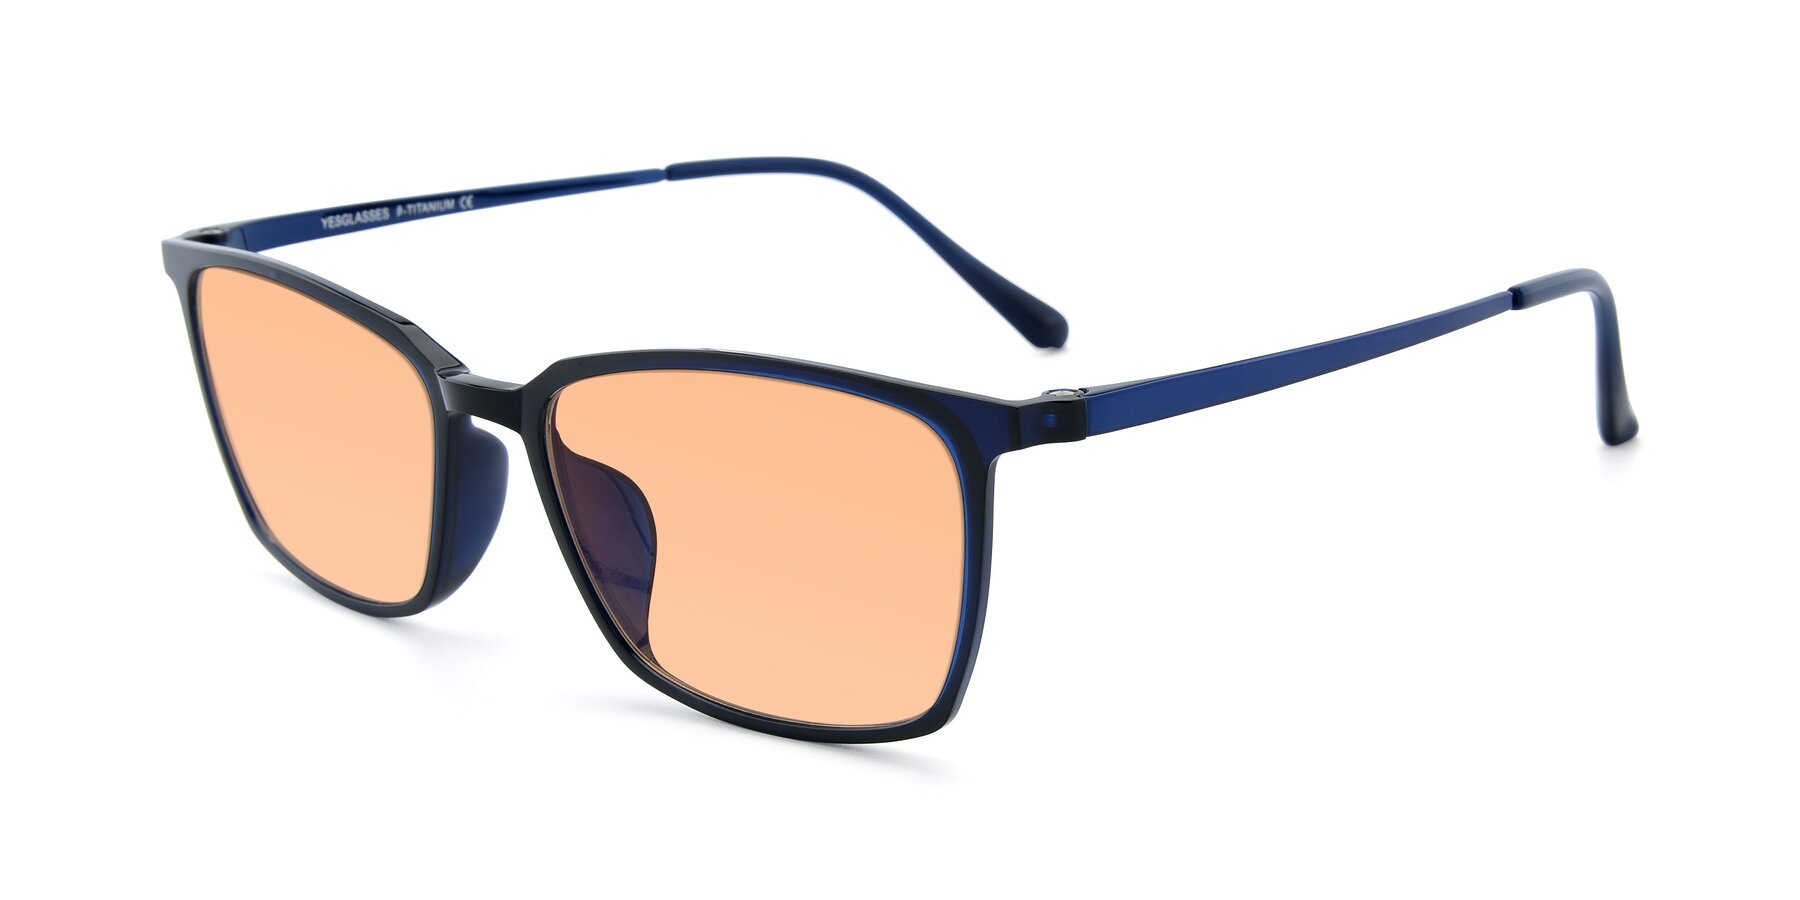 Angle of XC-5009 in Blue with Light Orange Tinted Lenses